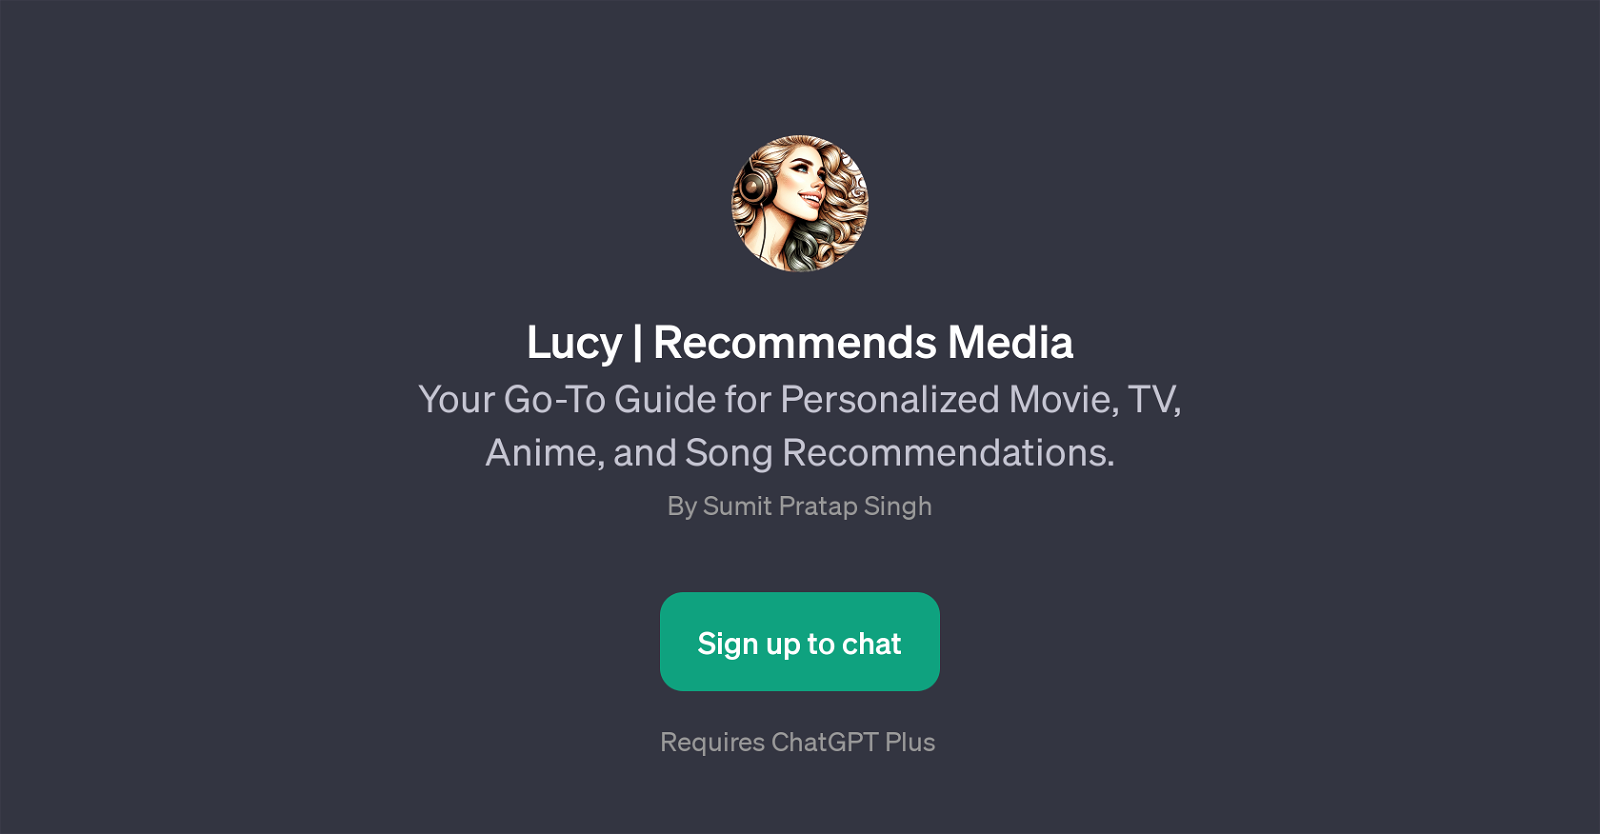 Lucy | Recommends Media website